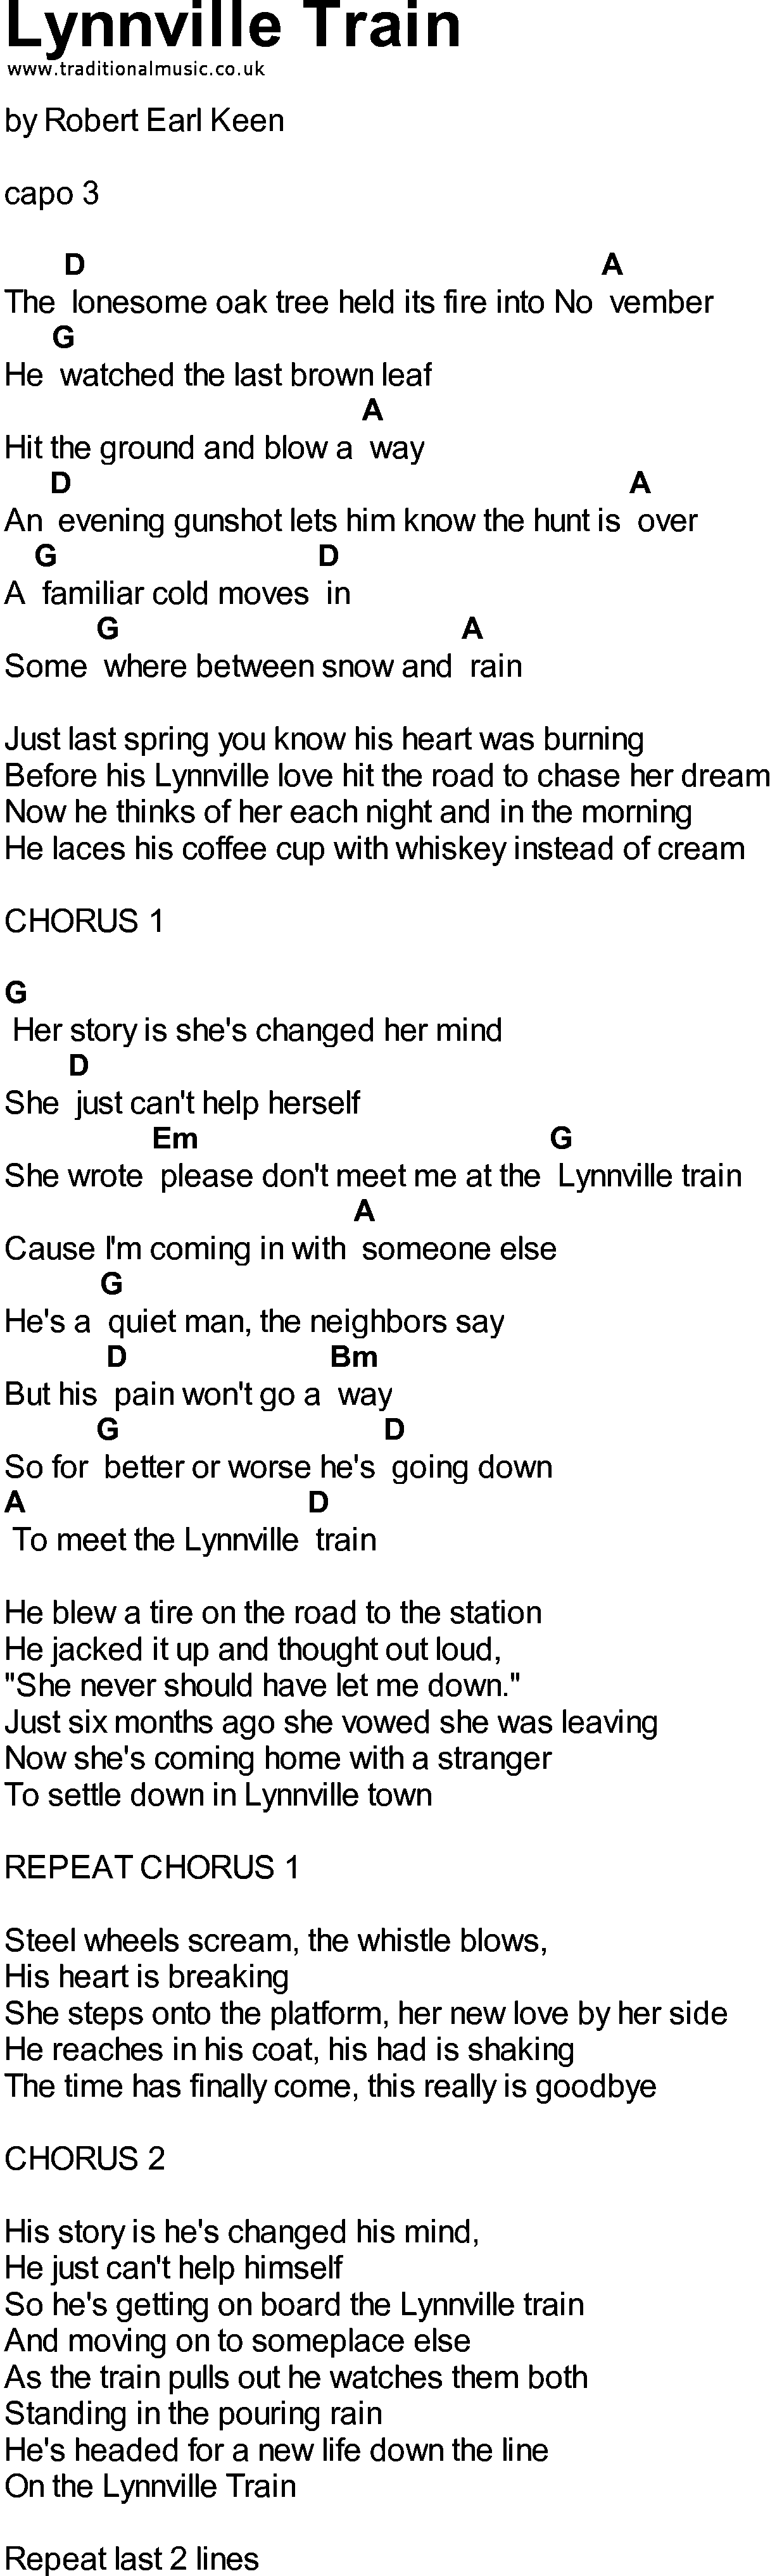 Bluegrass songs with chords - Lynnville Train